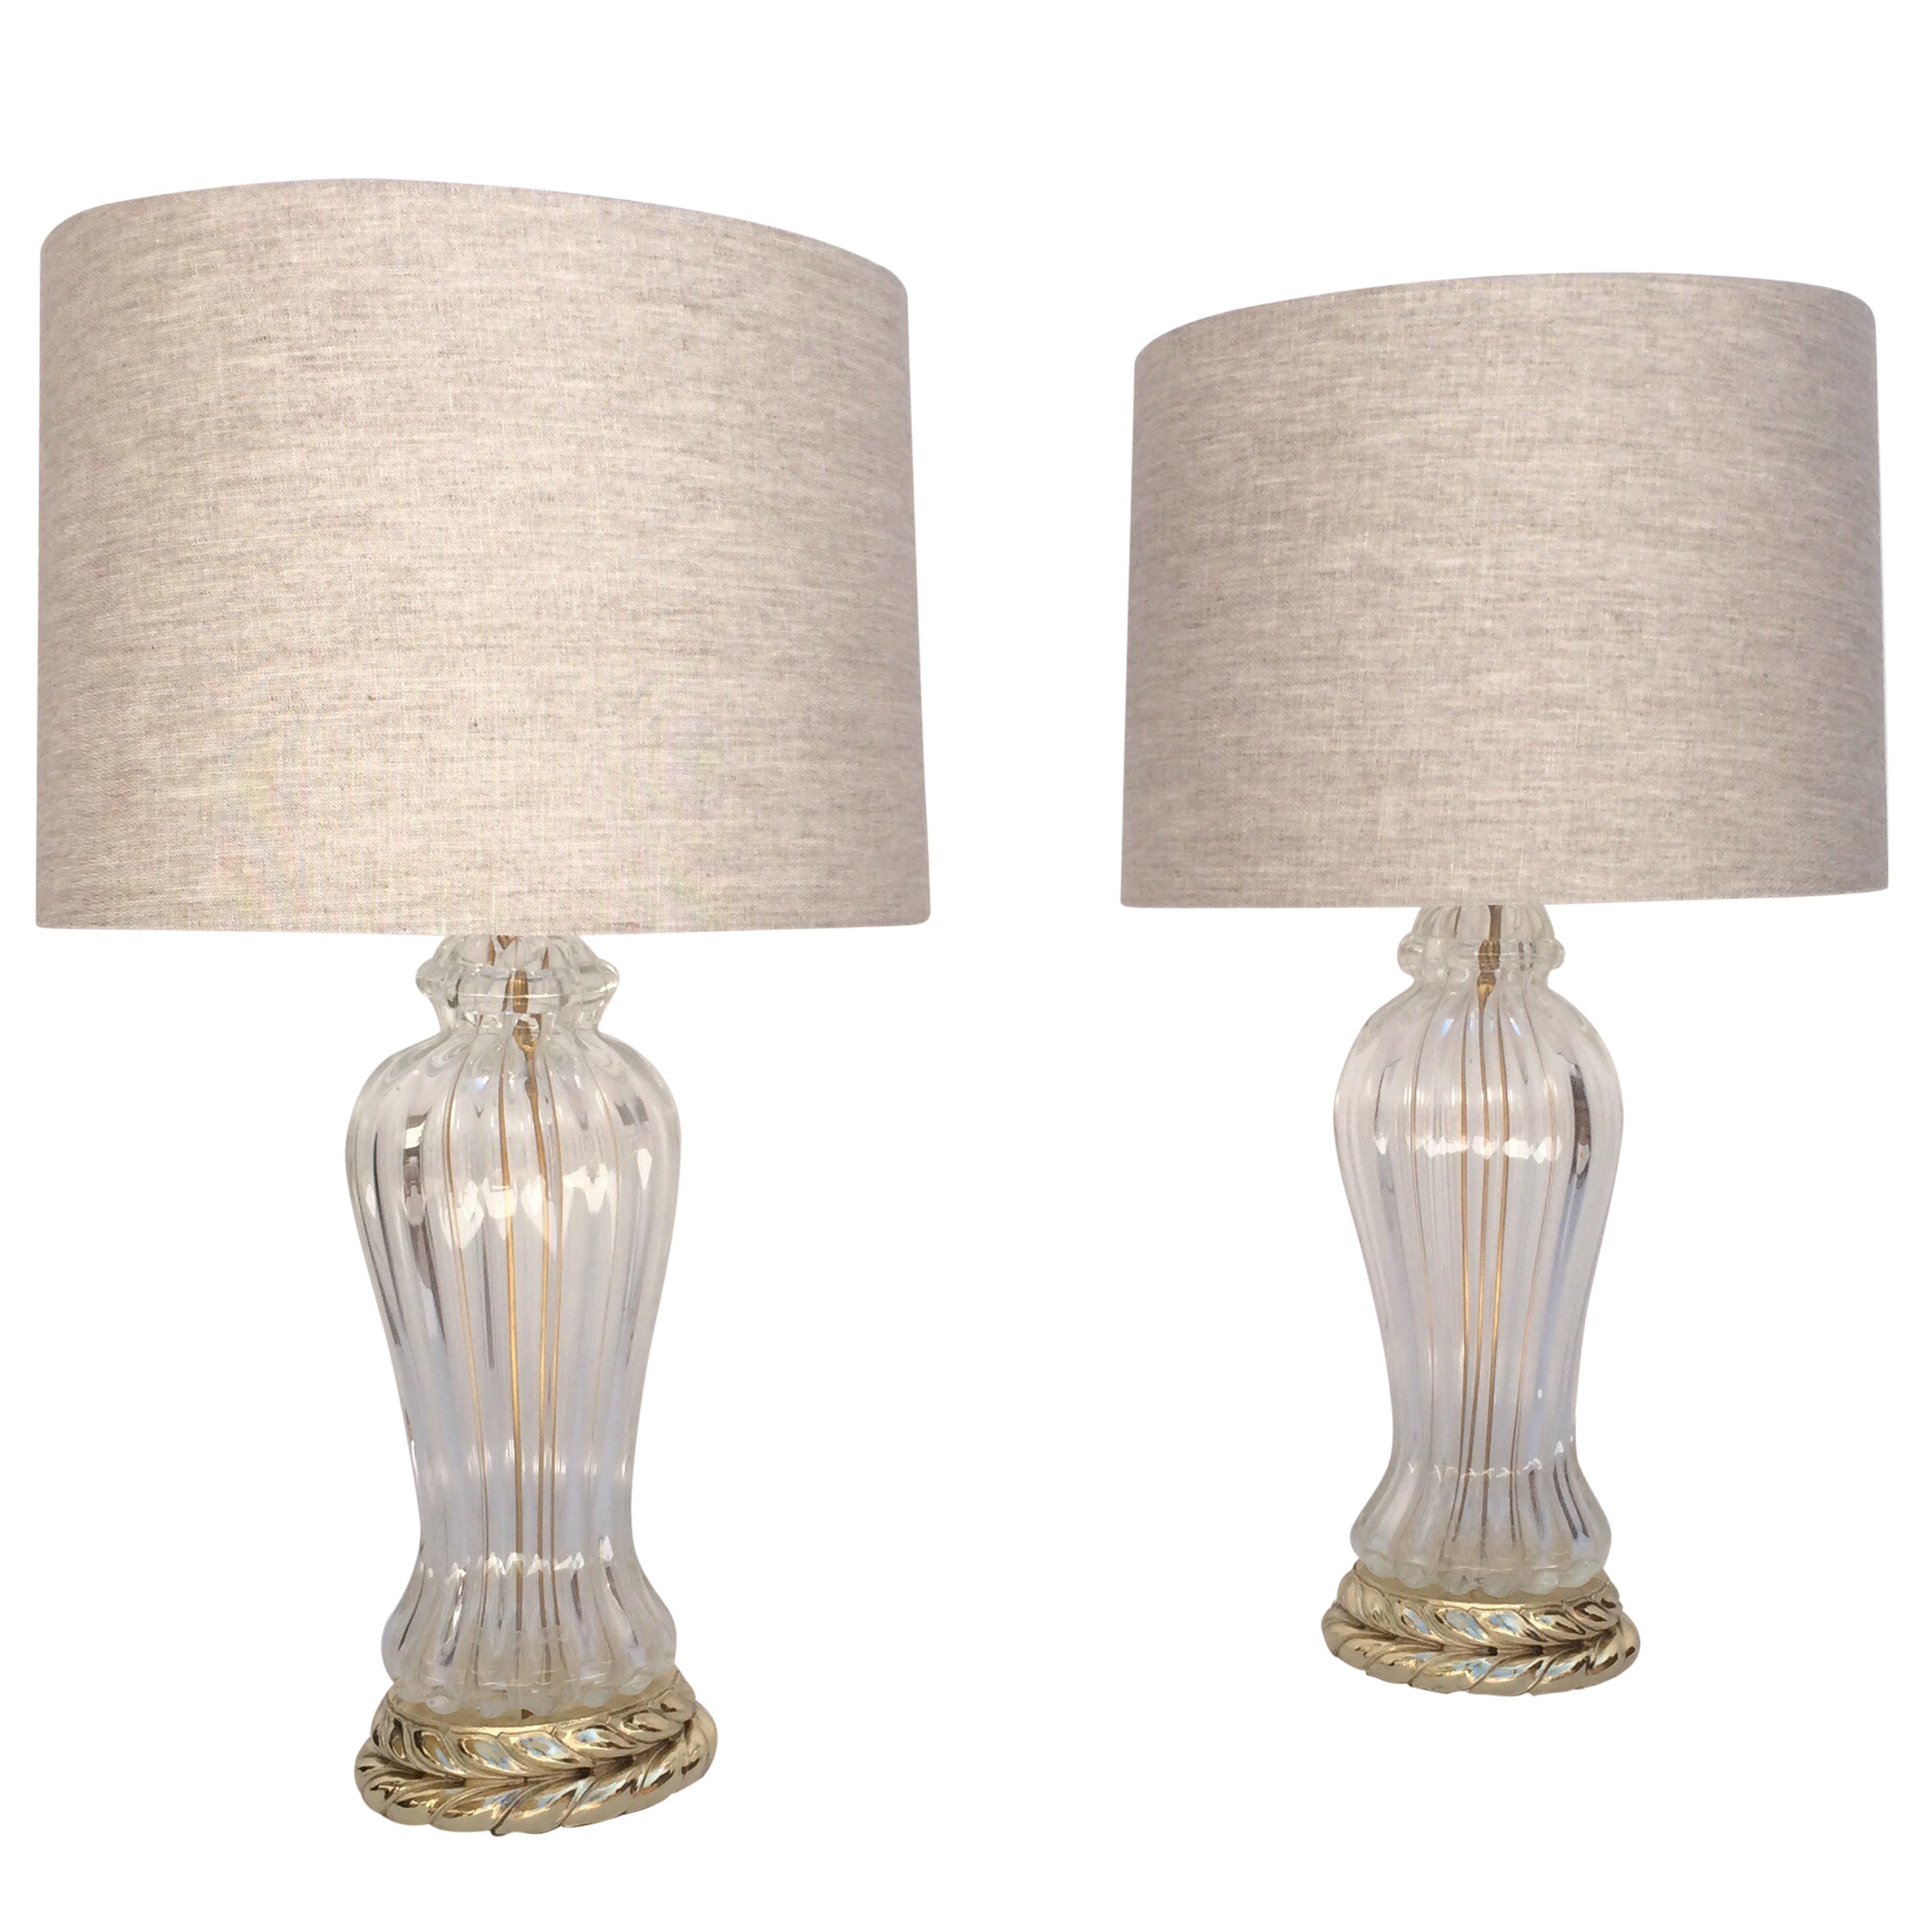 Pair of Murano Glass Table Lamps Made by Marbro Lamp Company For Sale